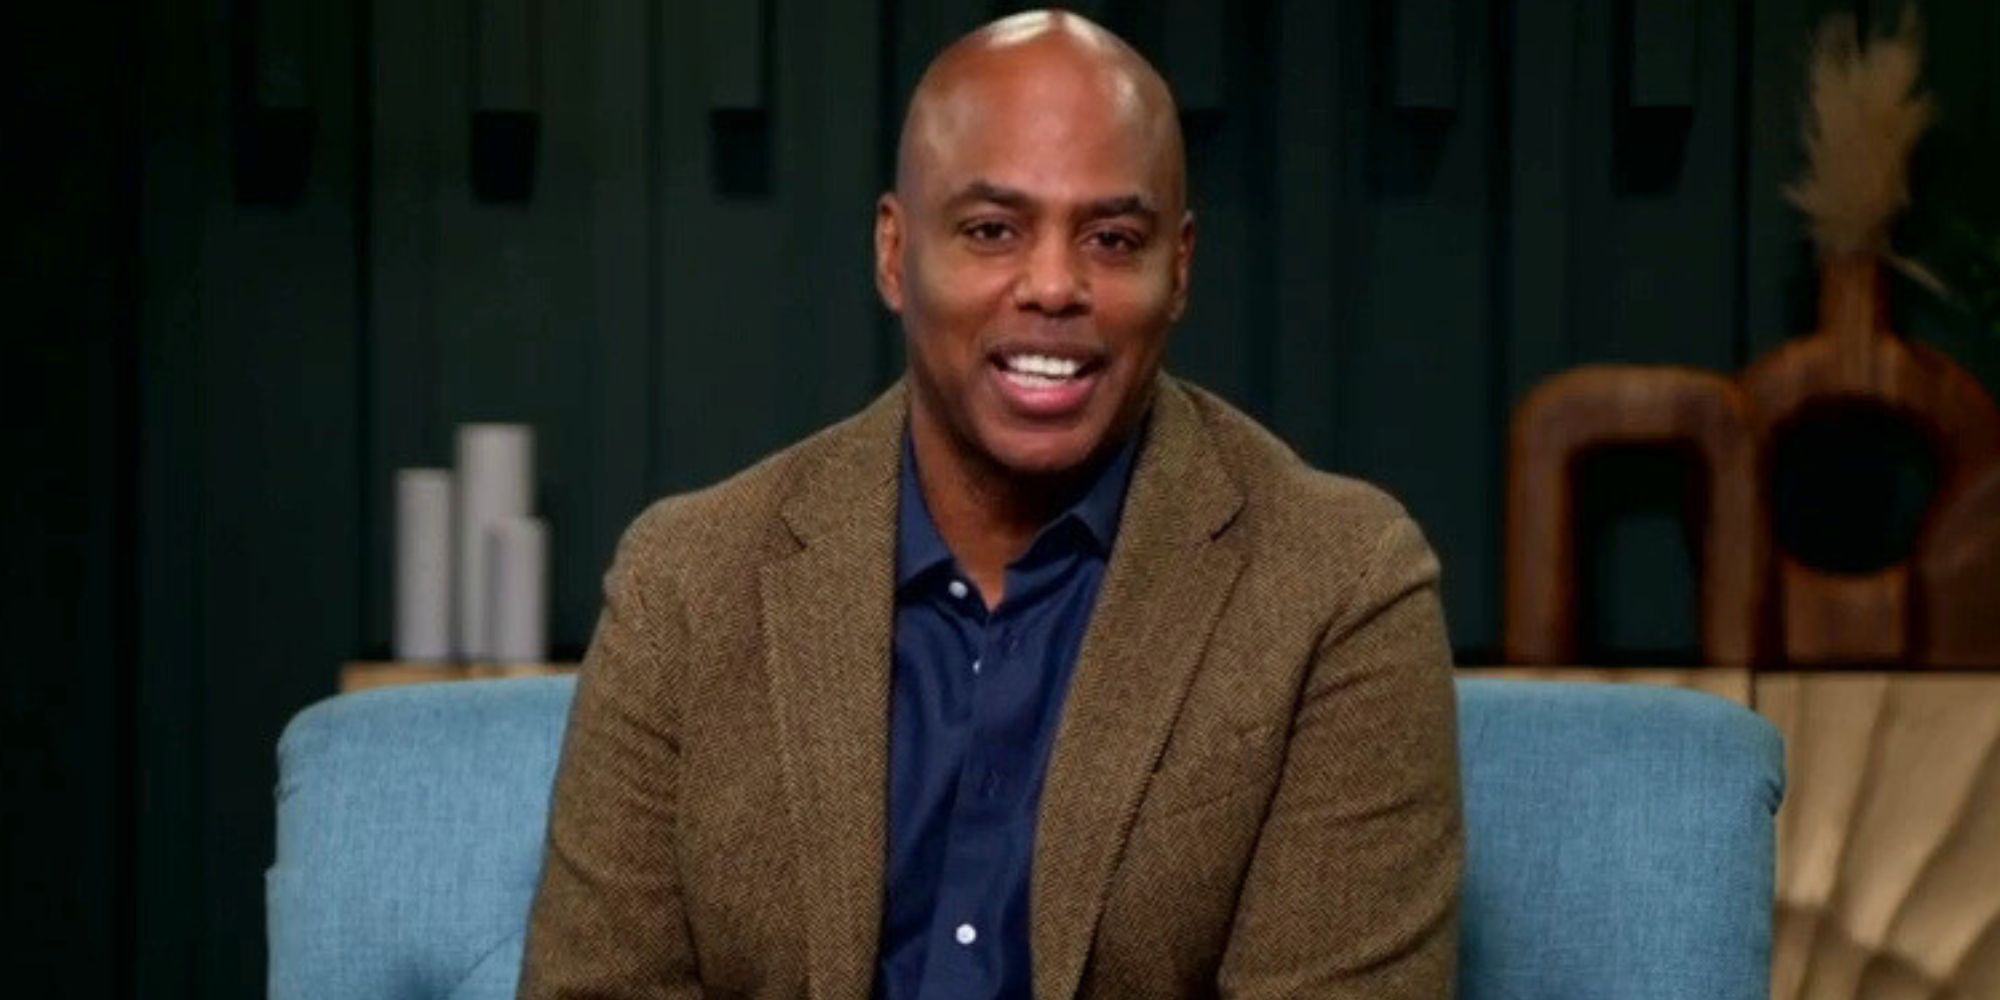 Married at First Sight The Journey So Far host Kevin Frazier doing an introduction